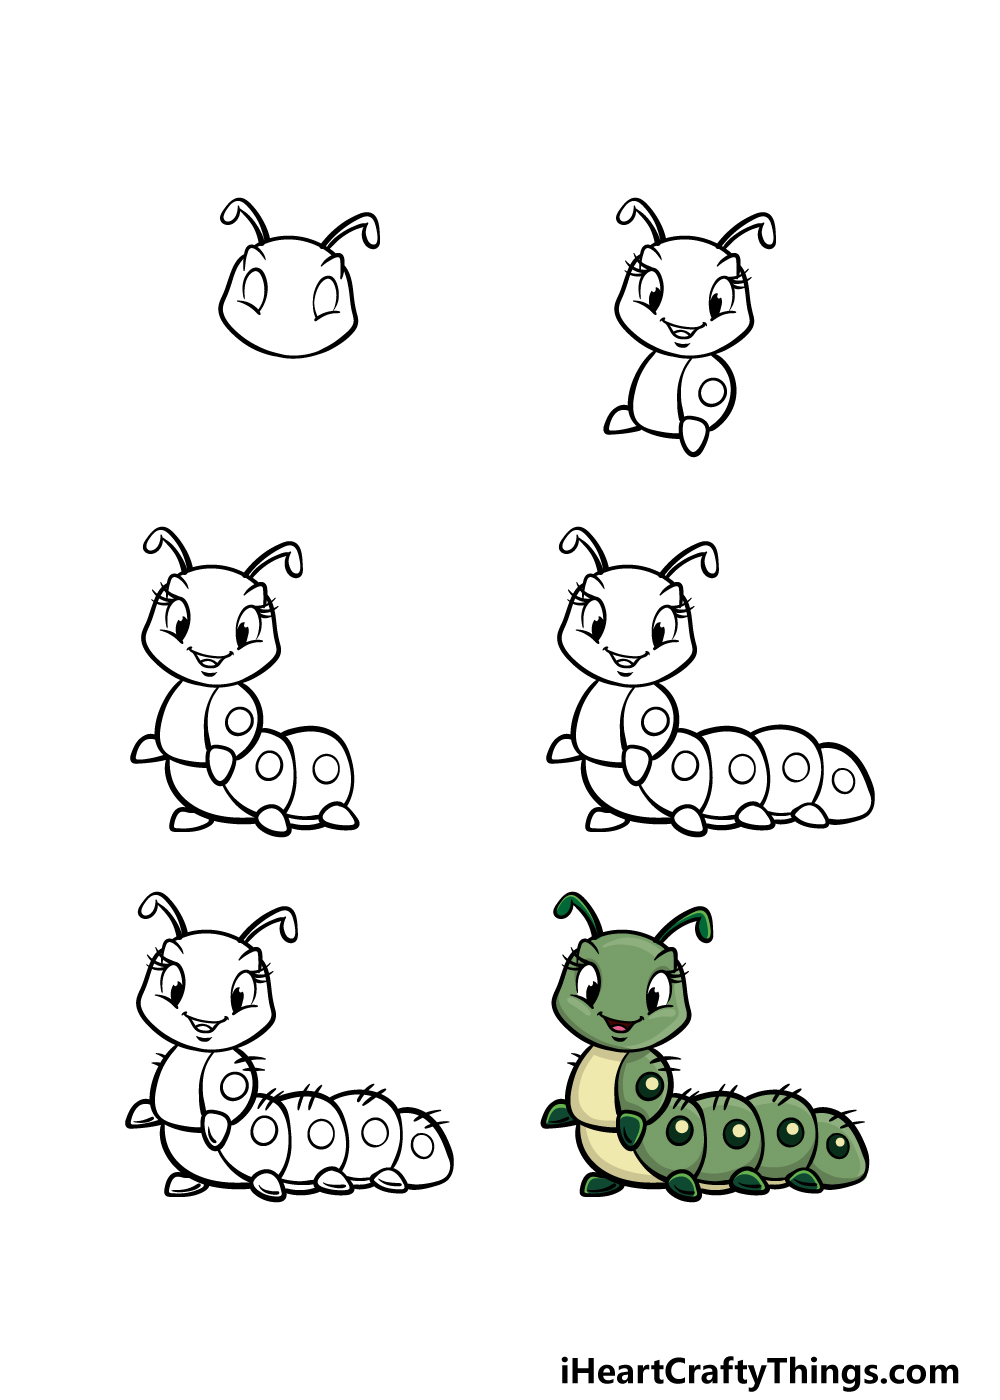 how to draw a cartoon caterpillar in 6 steps